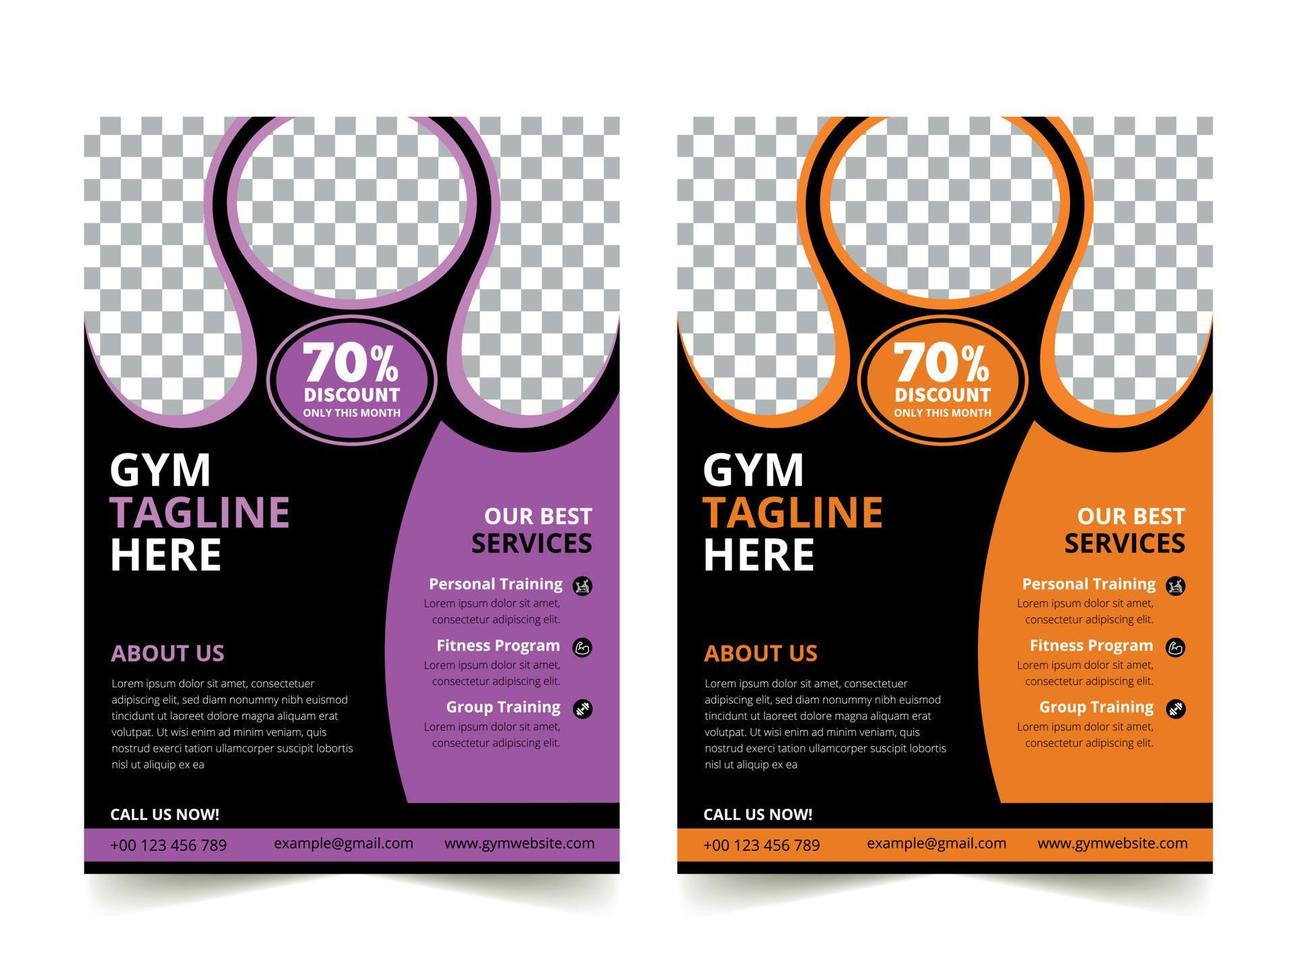 Business Gym Fitness Flyer yellow and purple color design corporate template design for annual report company leaflet cover Free Vector